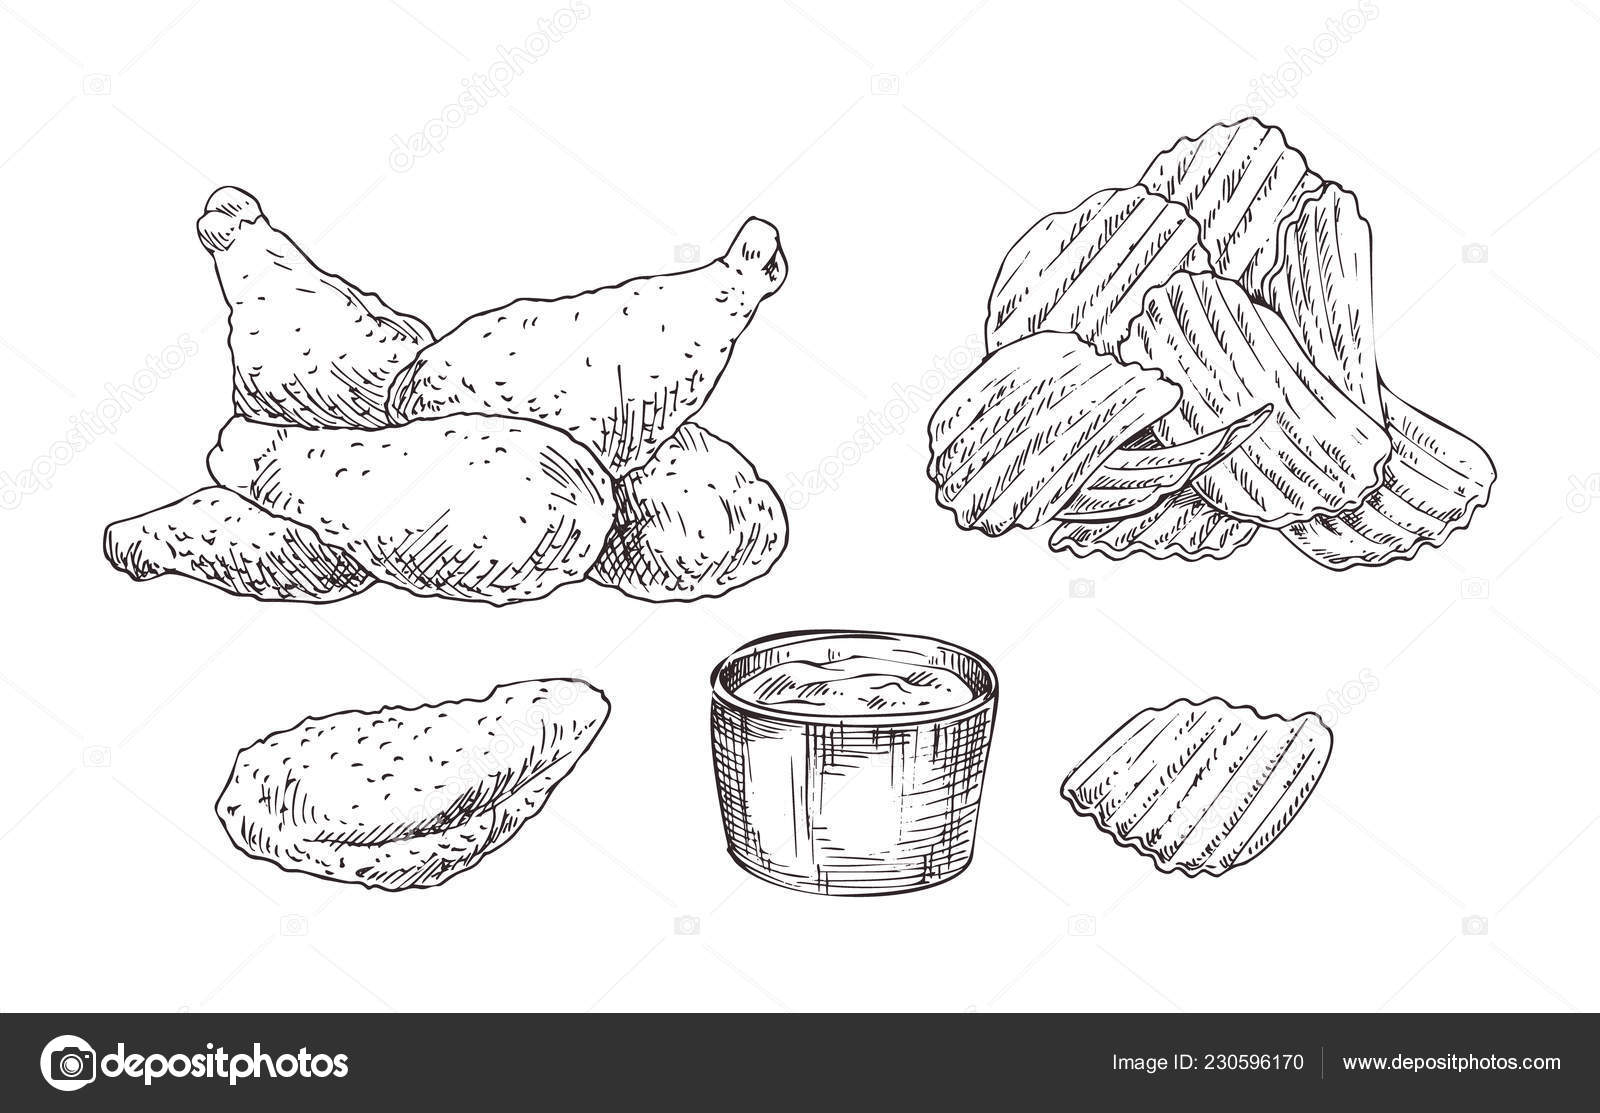 Premium Vector | Chicken nuggets drawing vector illustration black and  white colors simple doodle hand drawn